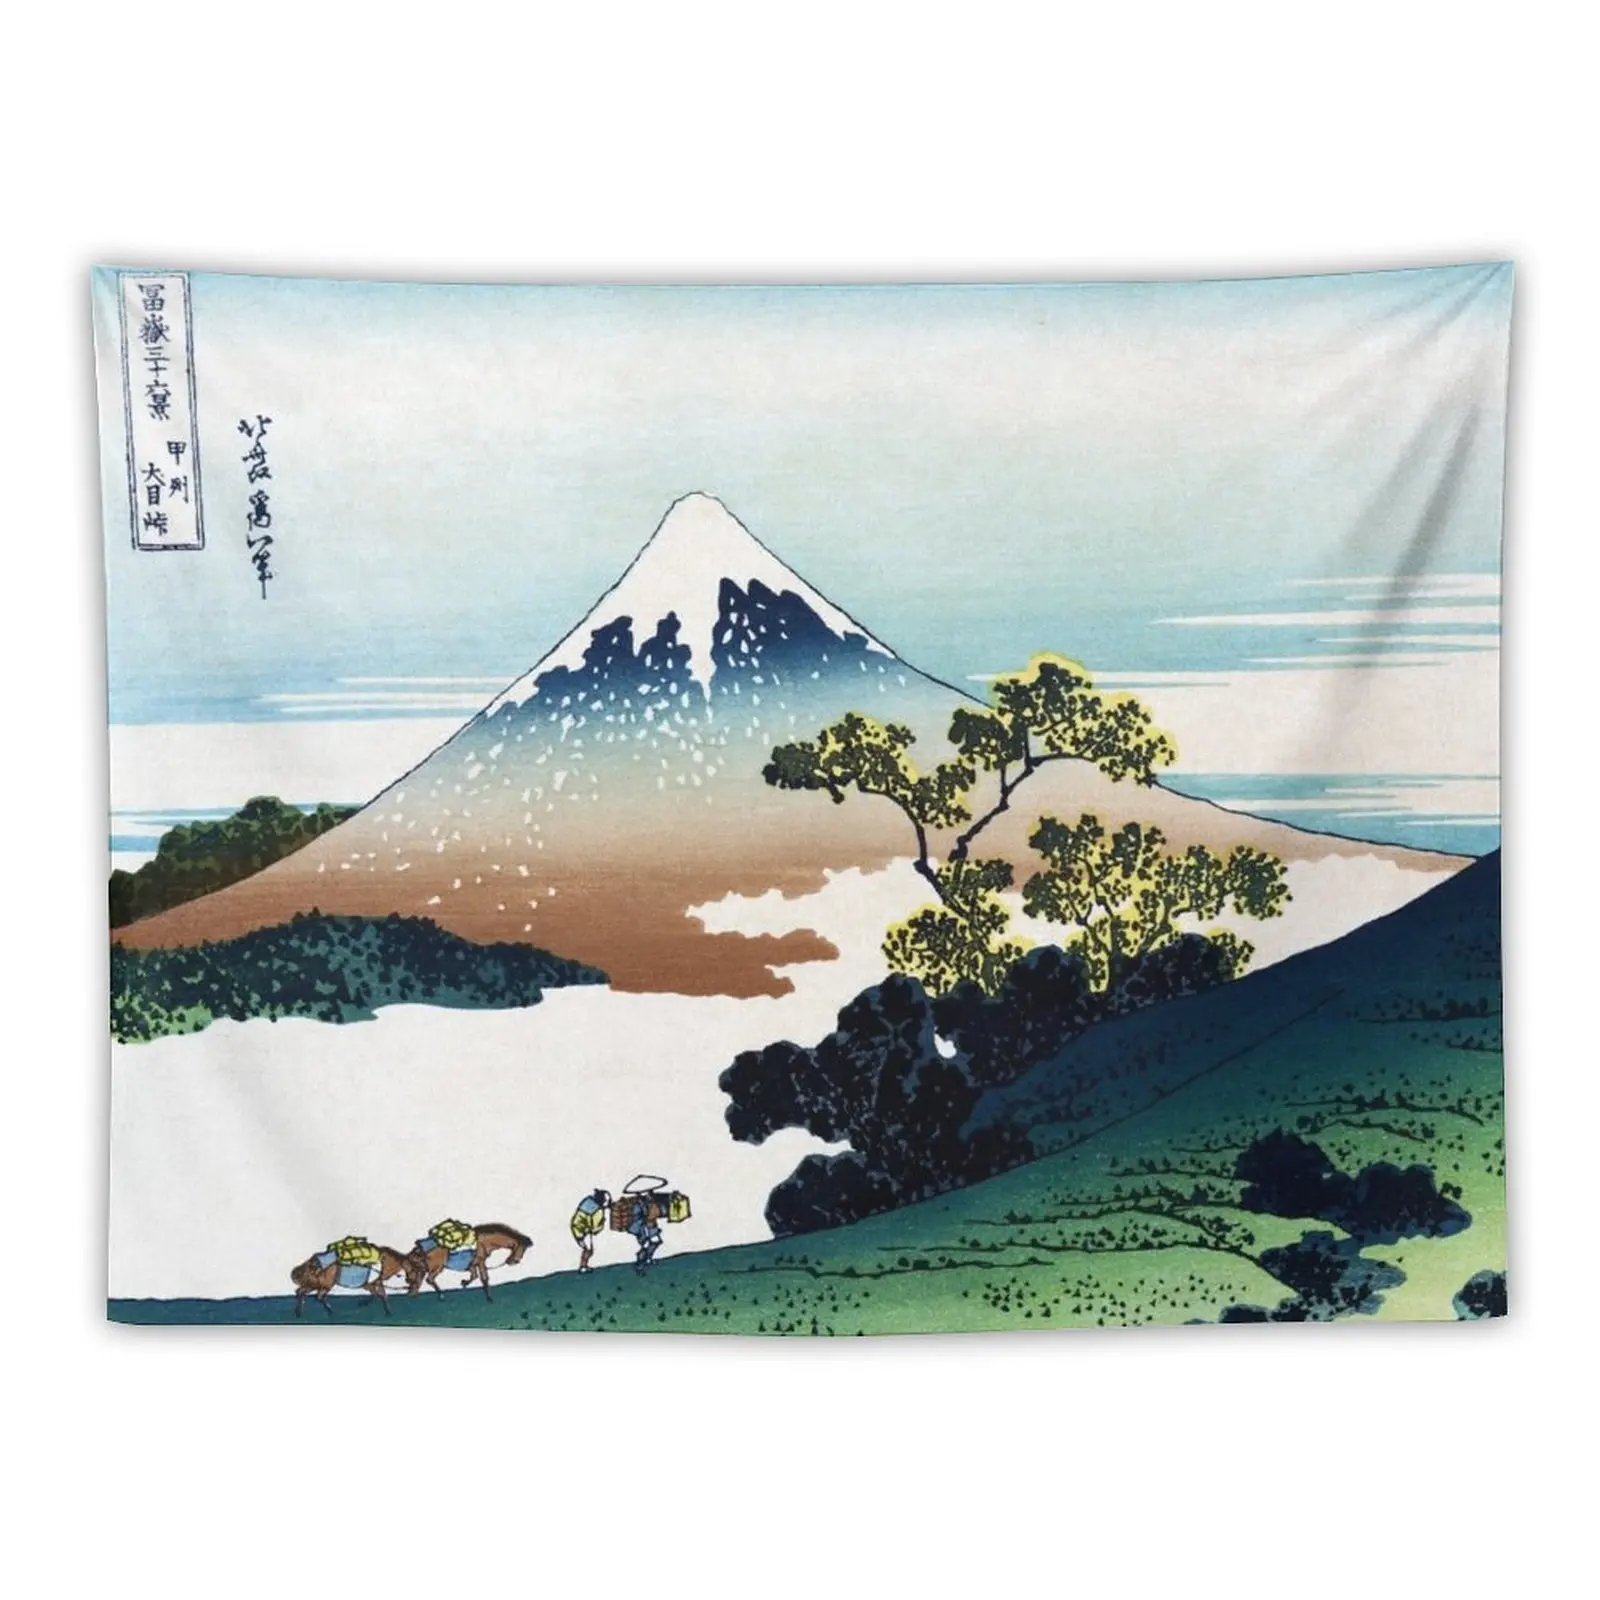 

The Inume Pass in Kai Province by Katsushika Hokusai Tapestry Carpet Wall Bedroom Decoration Wall Decorations